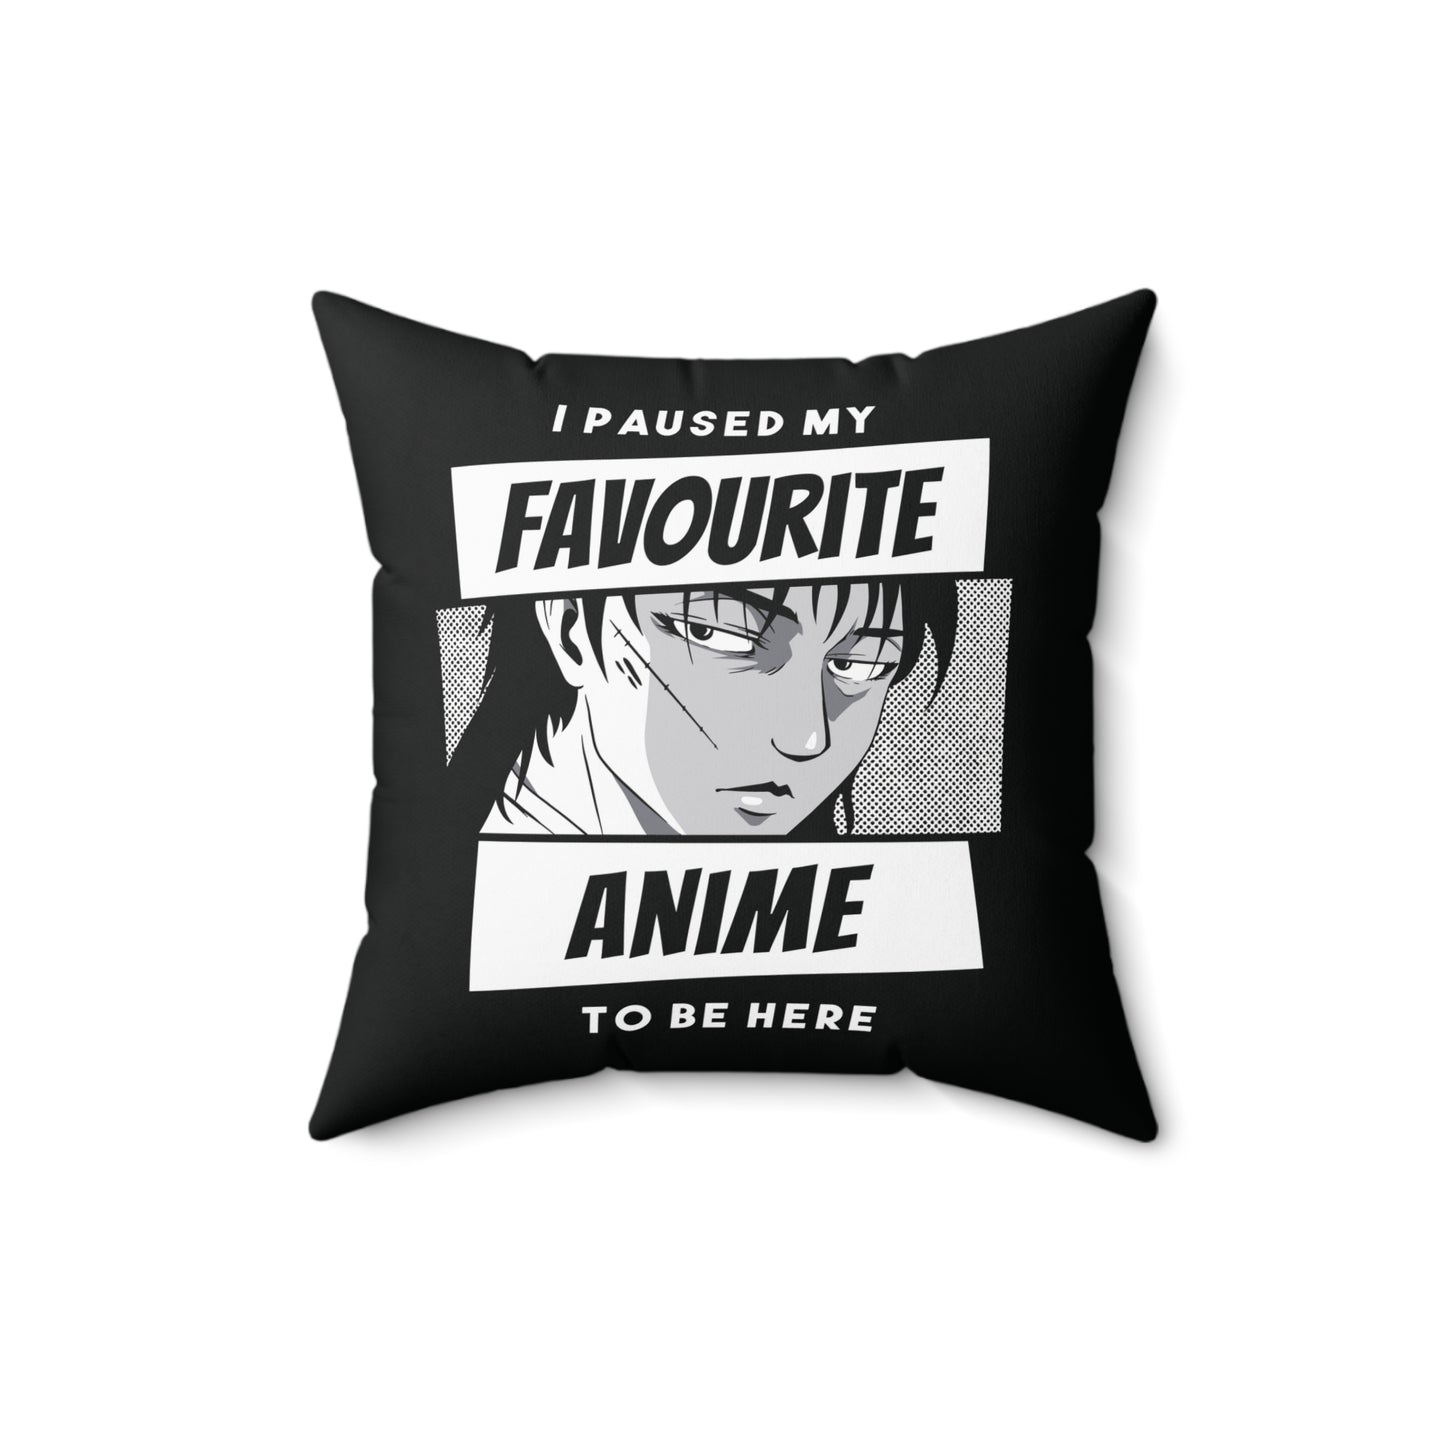 I Paused my favourite Anime to be here Square Pillow